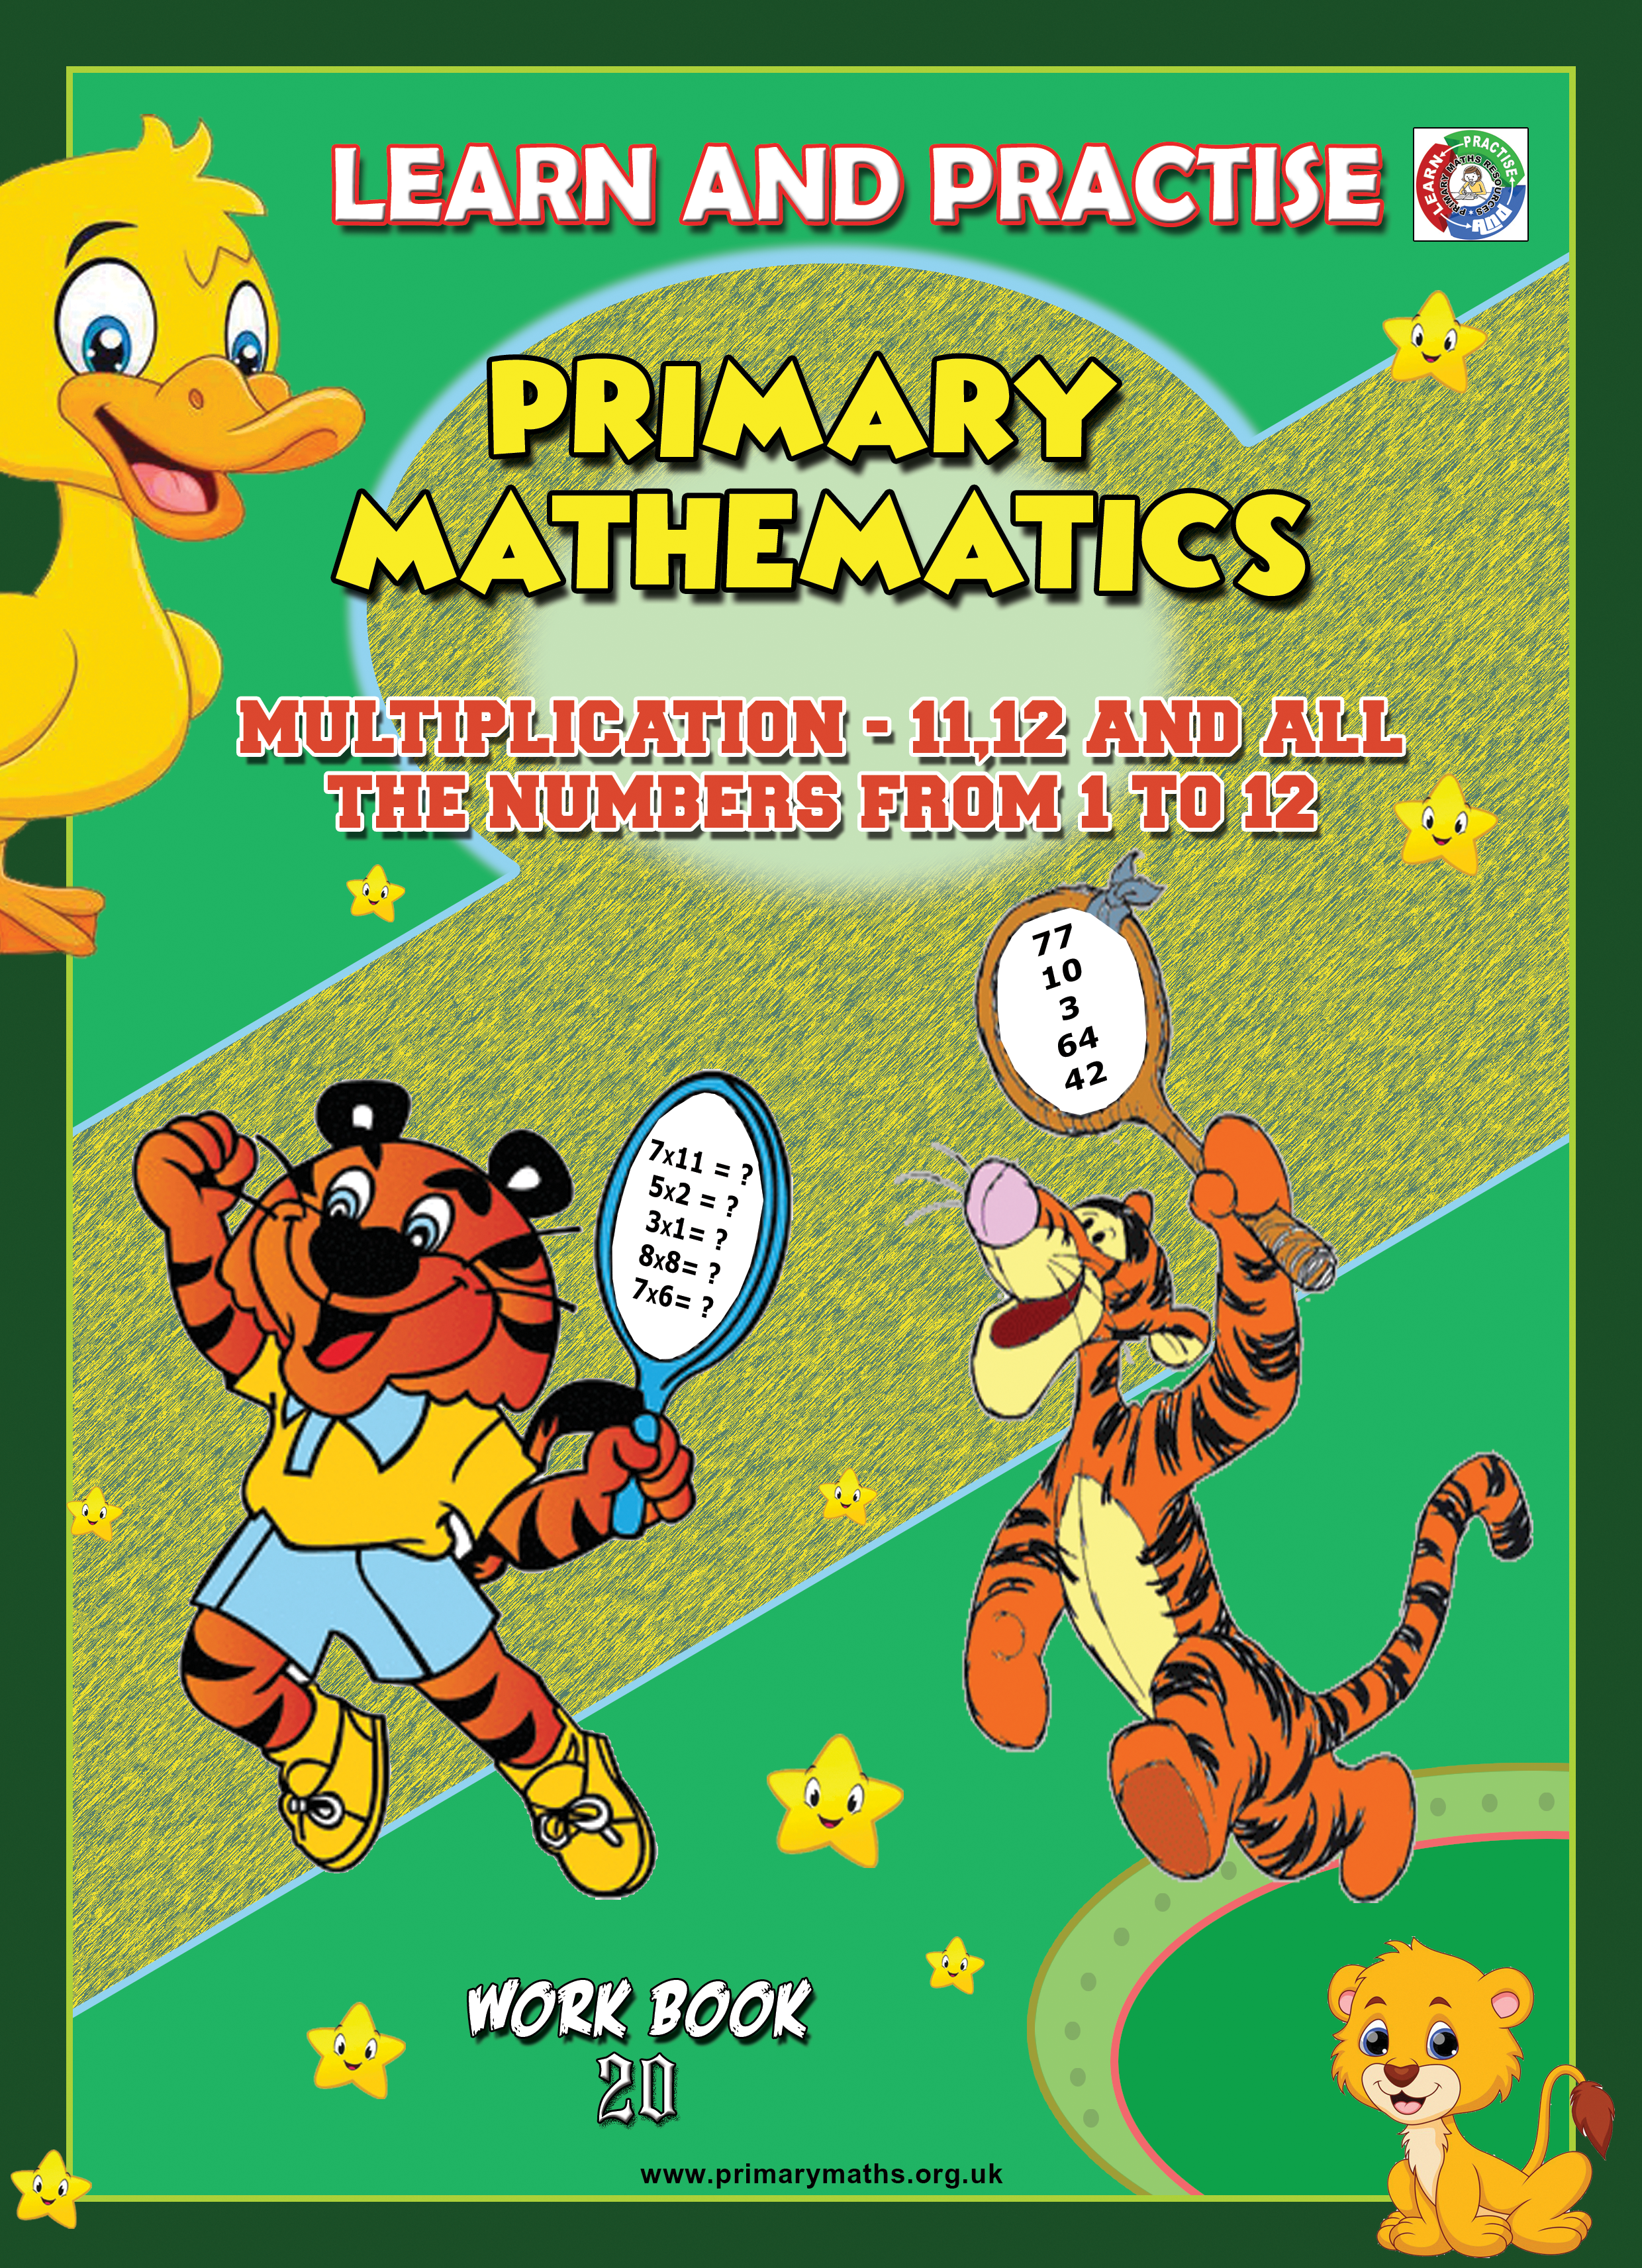  MULTIPLICATION 11 12 AND ALL THE NUMBERS FROM 1 TO 12 Primary Maths Resources LTD